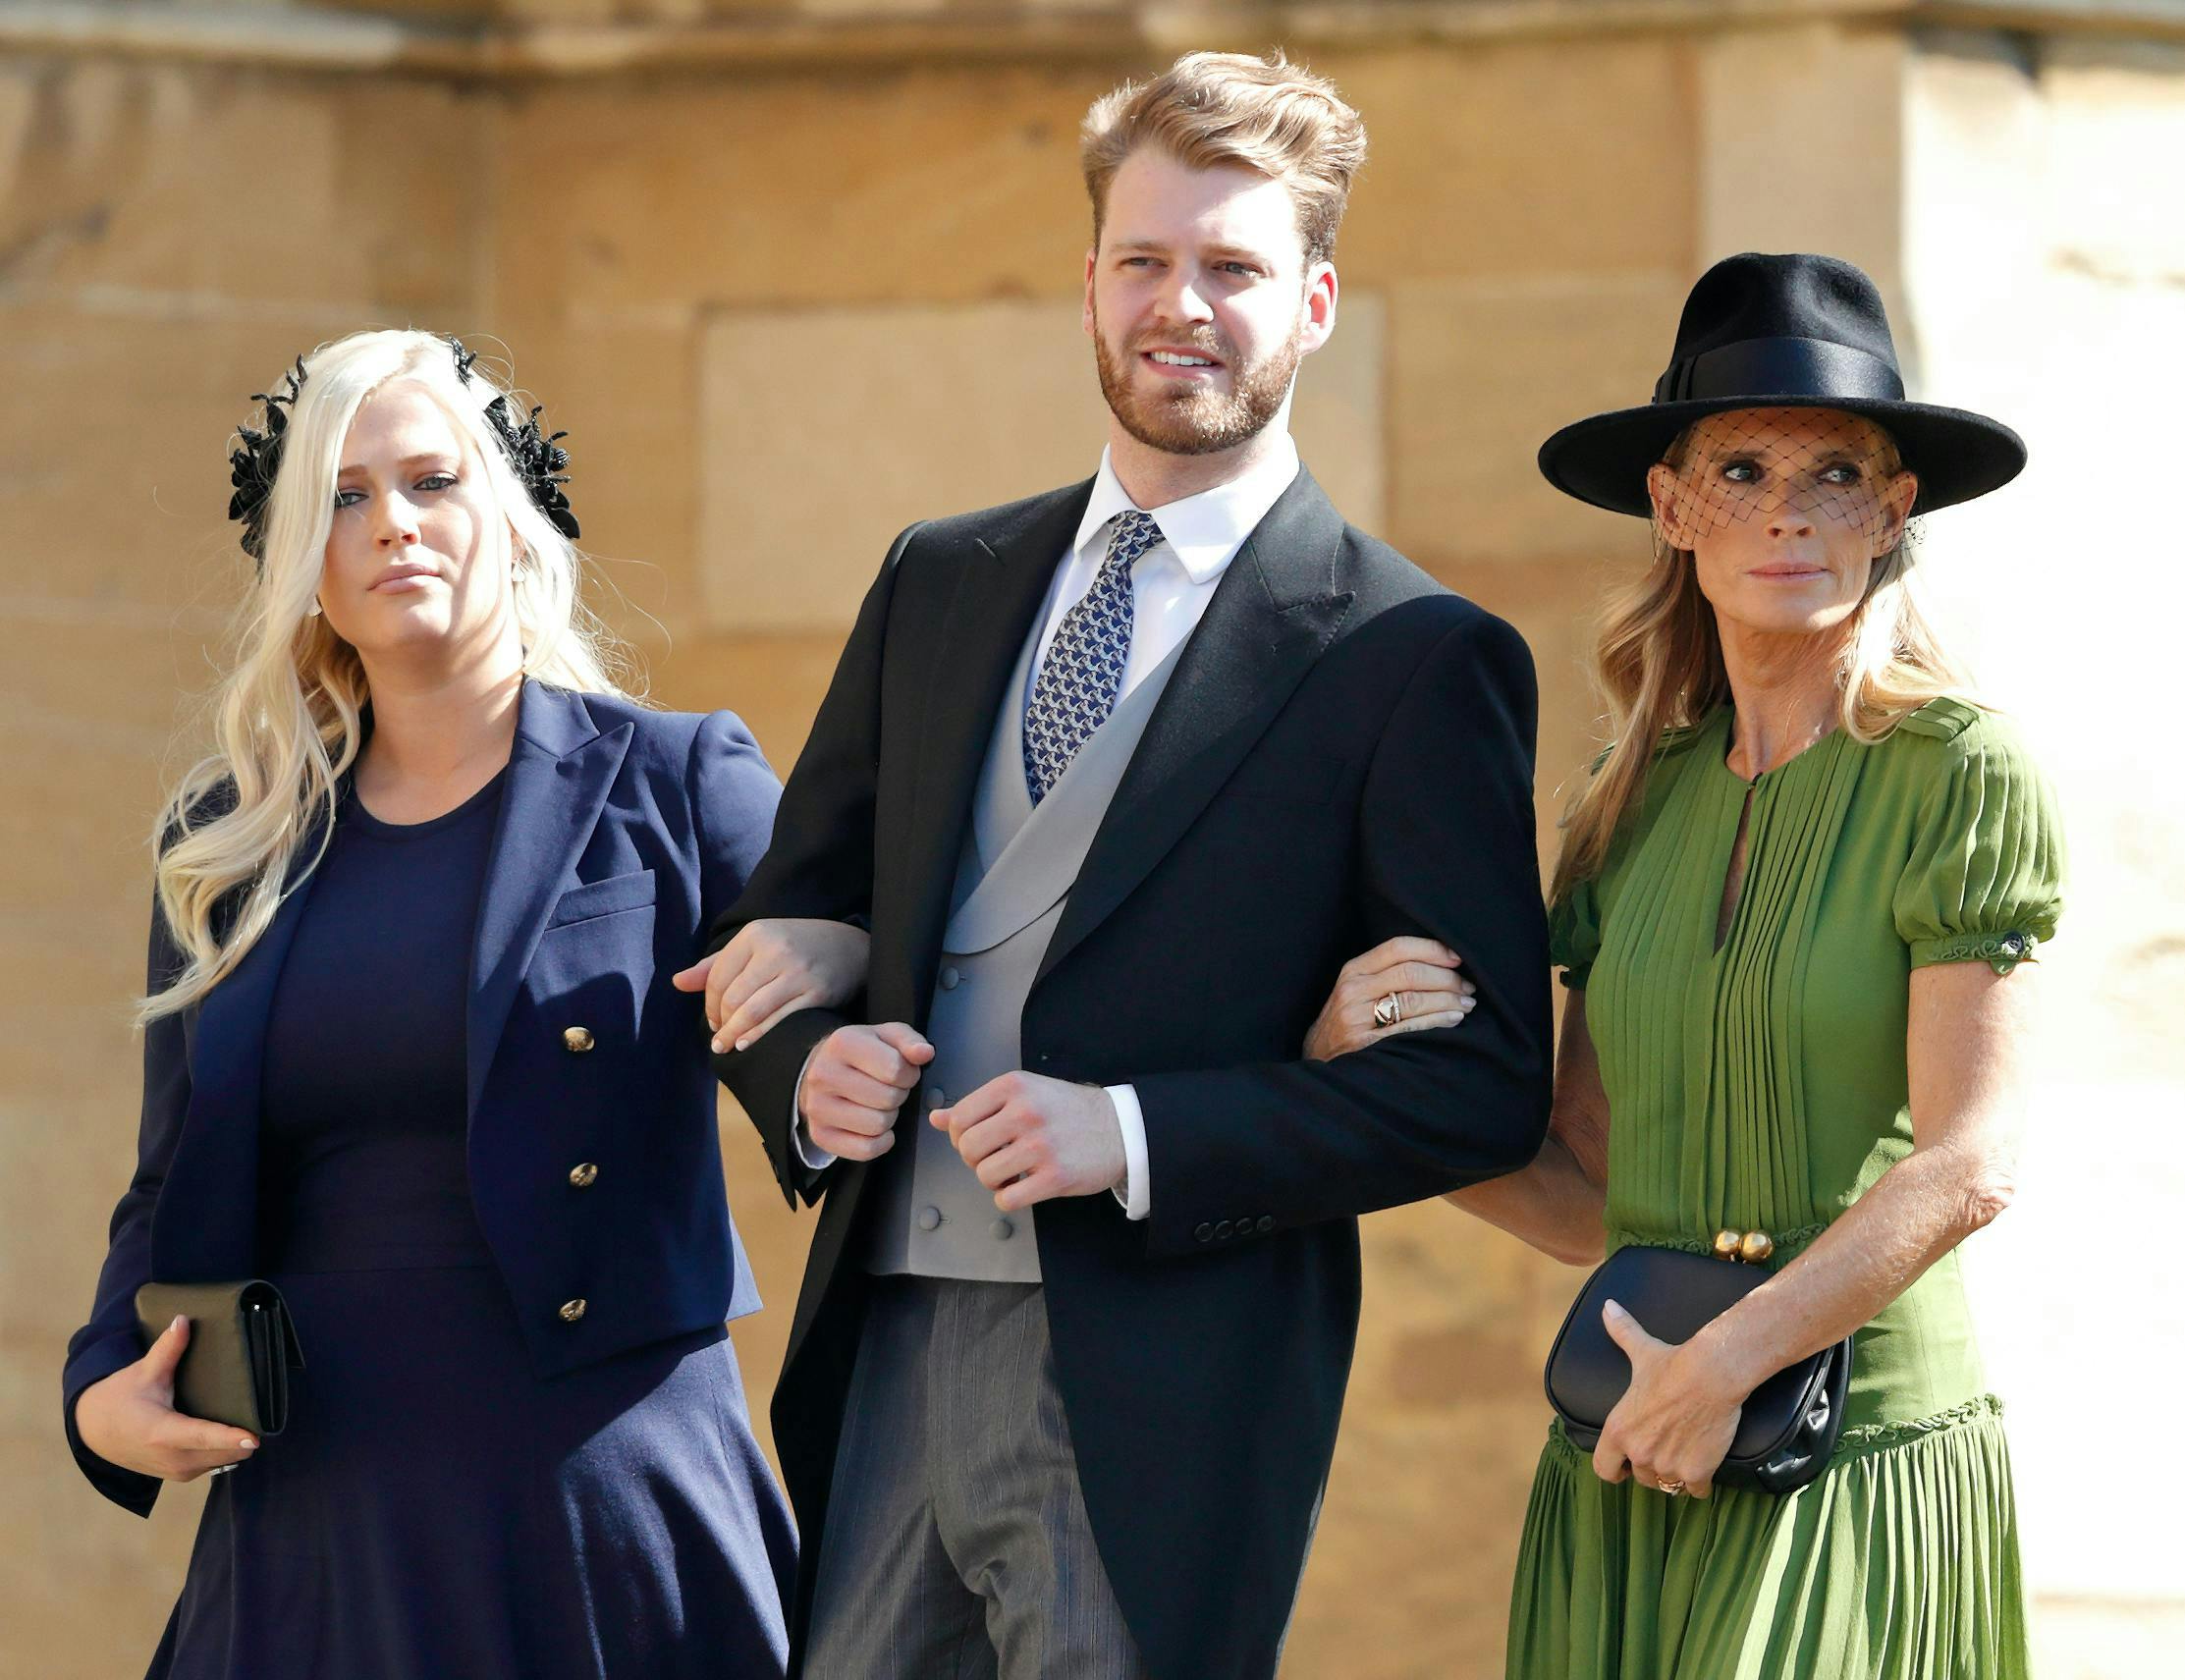 Louis Spencer with his mother and sister at the wedding of Prince Harry and Megan Markle in May of 2018.